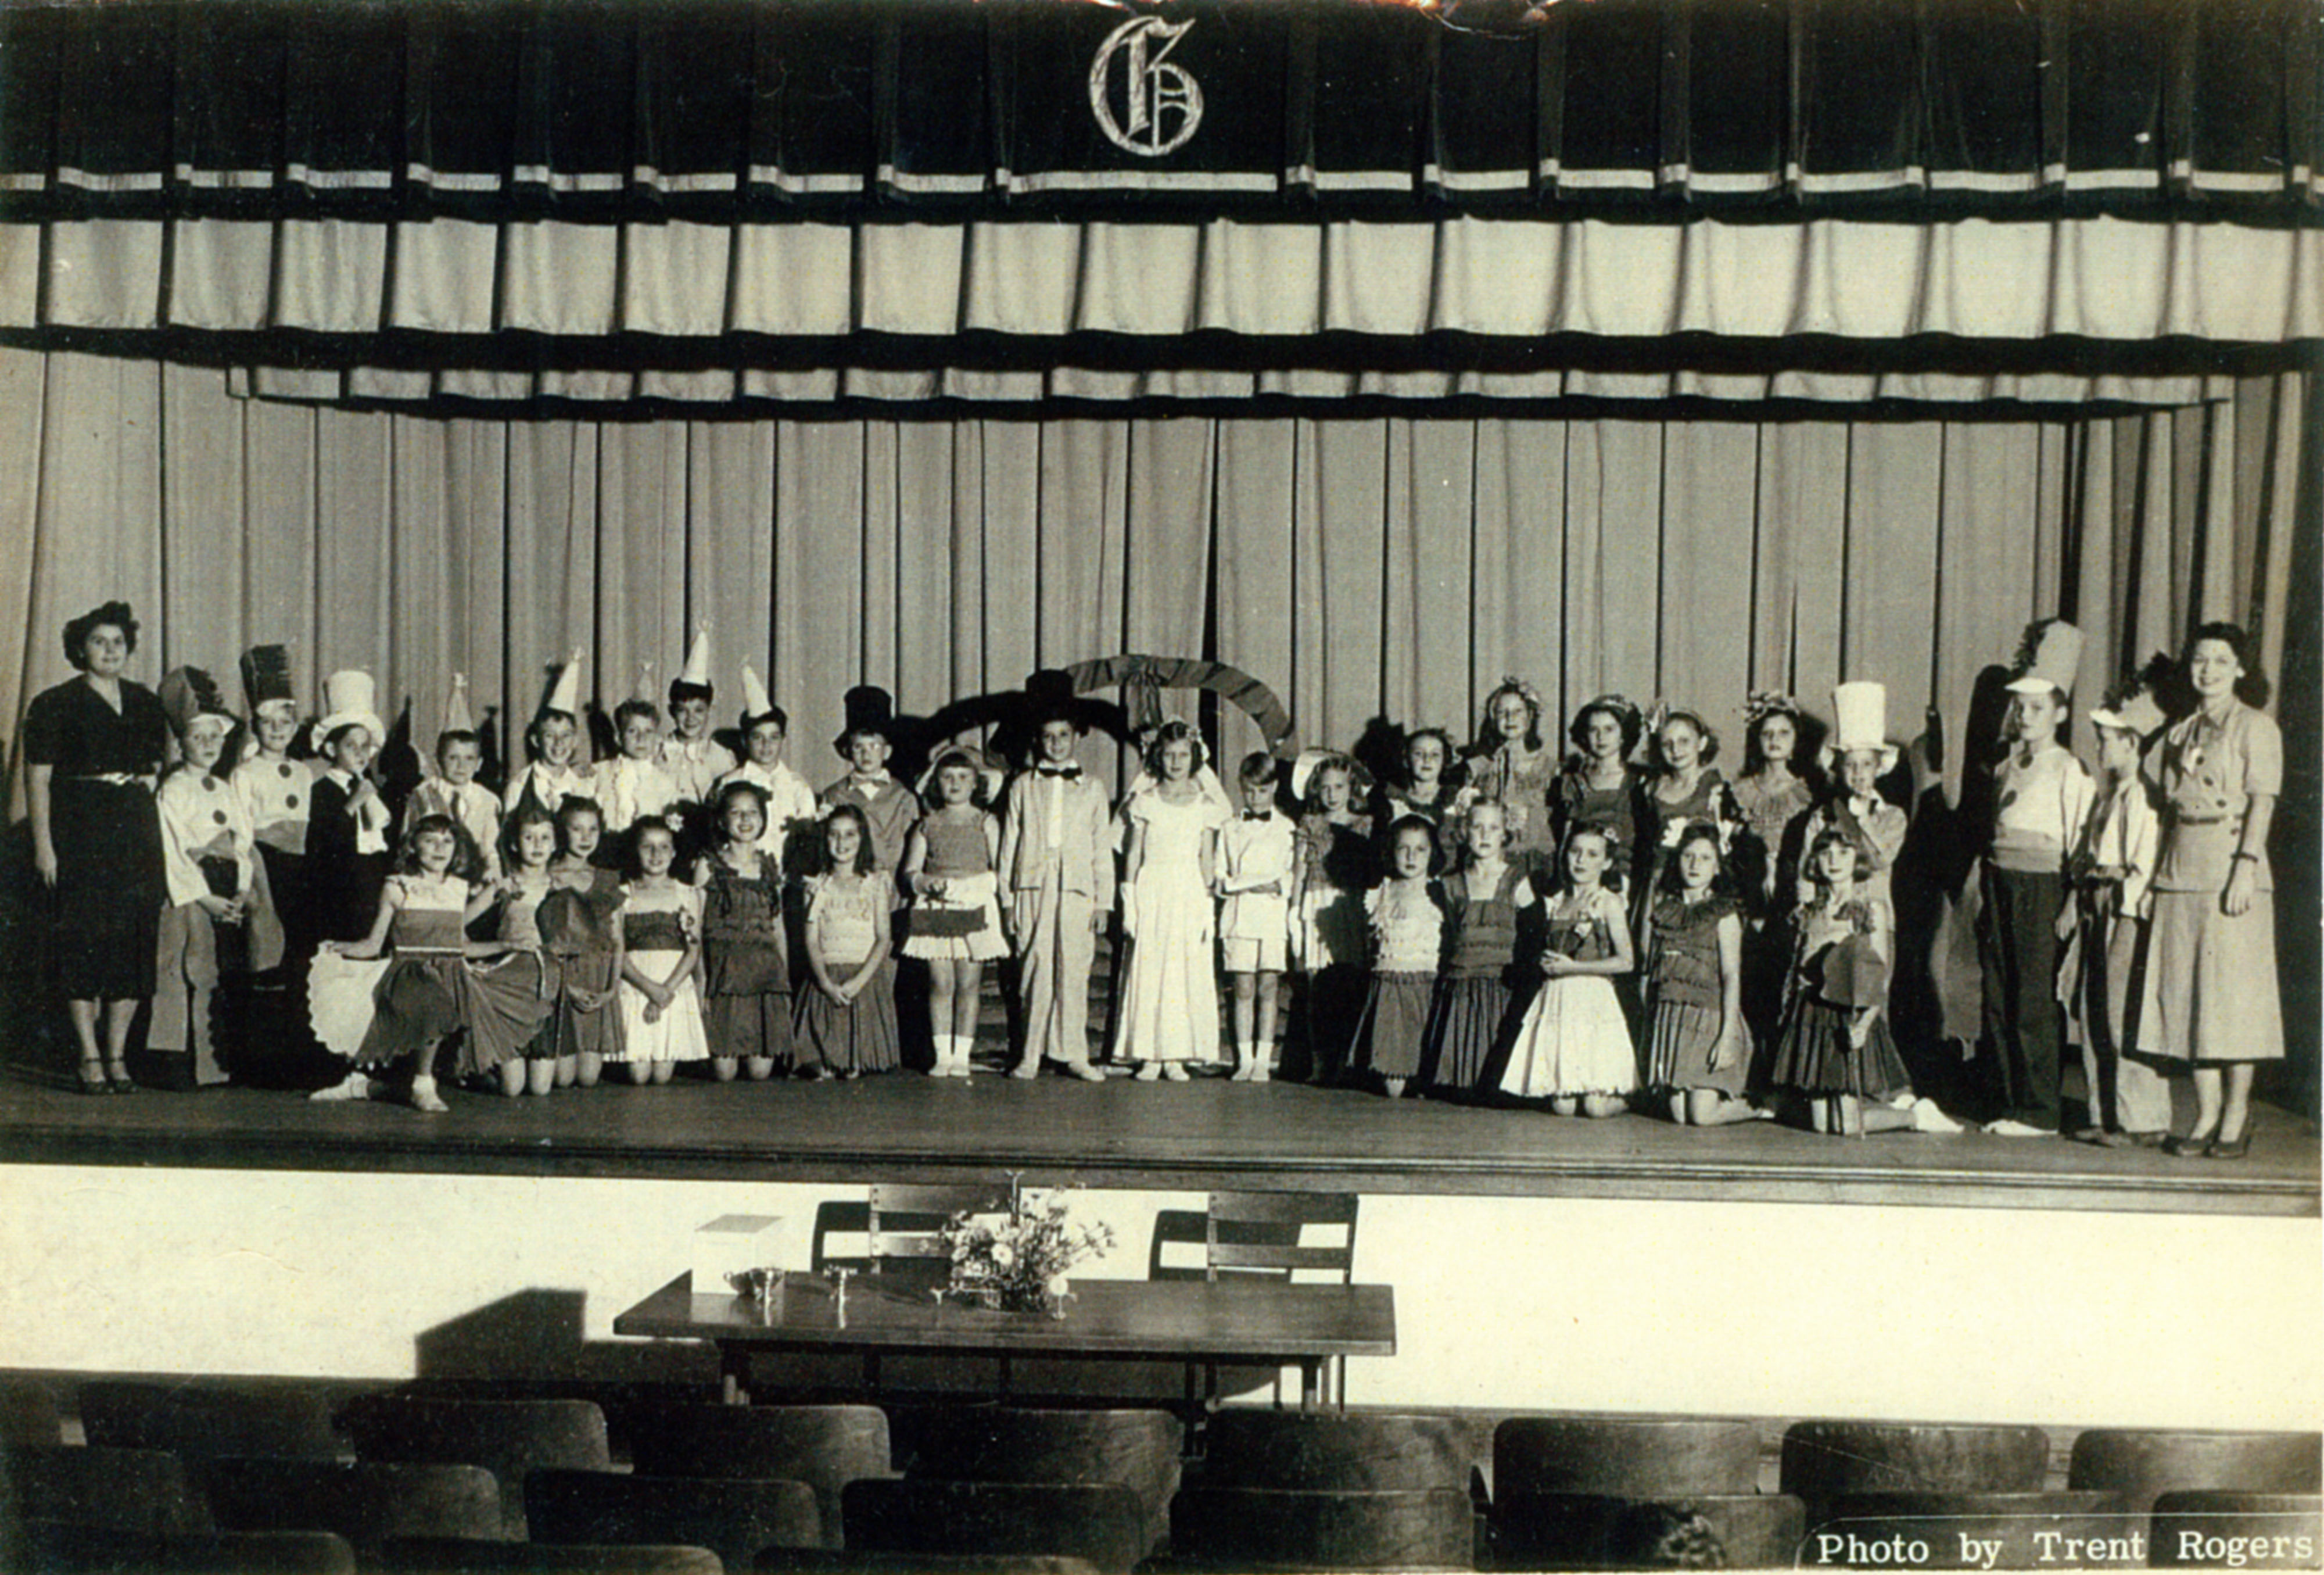 A play at Kirby Smith School stage, Gainesville, FL